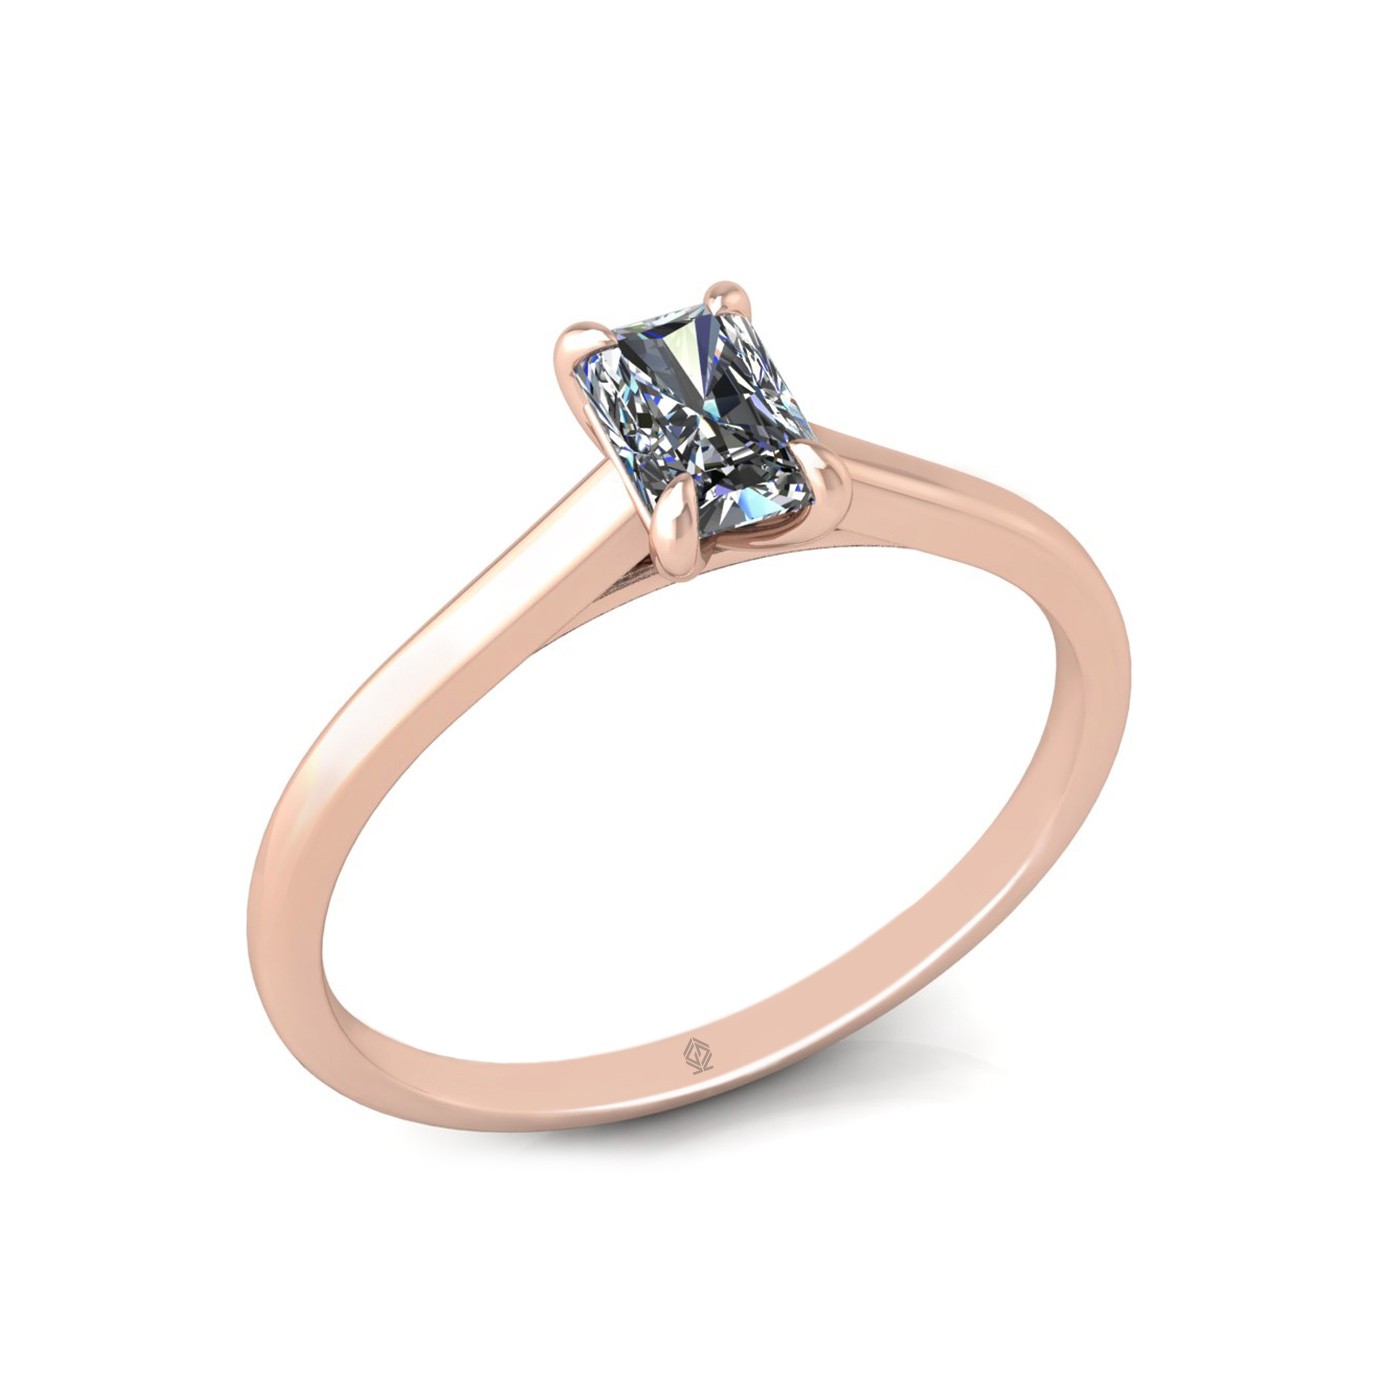 18k rose gold  0,50 ct 4 prongs solitaire radiant cut diamond engagement ring with whisper thin band